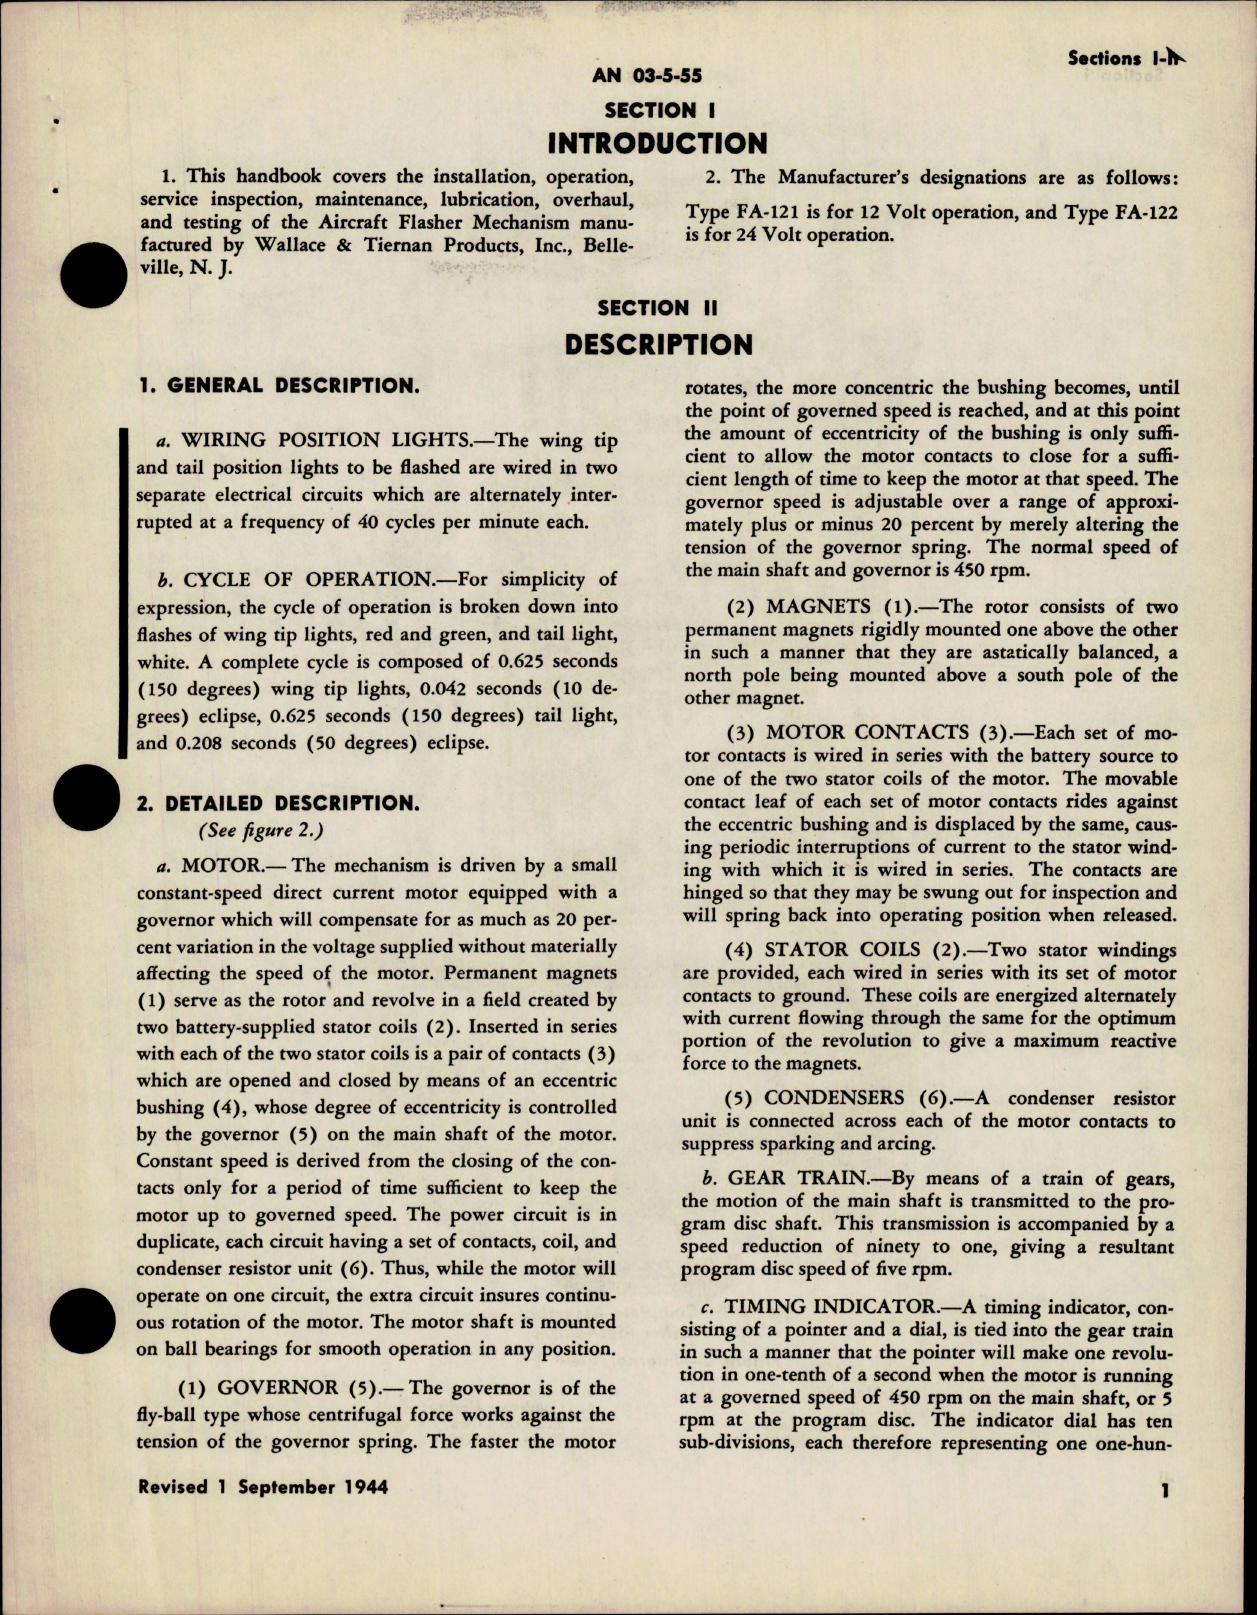 Sample page 5 from AirCorps Library document: Handbook of Instructions with Parts Catalog for Aircraft Flasher Mechanism - Types FA-121 and FA-122